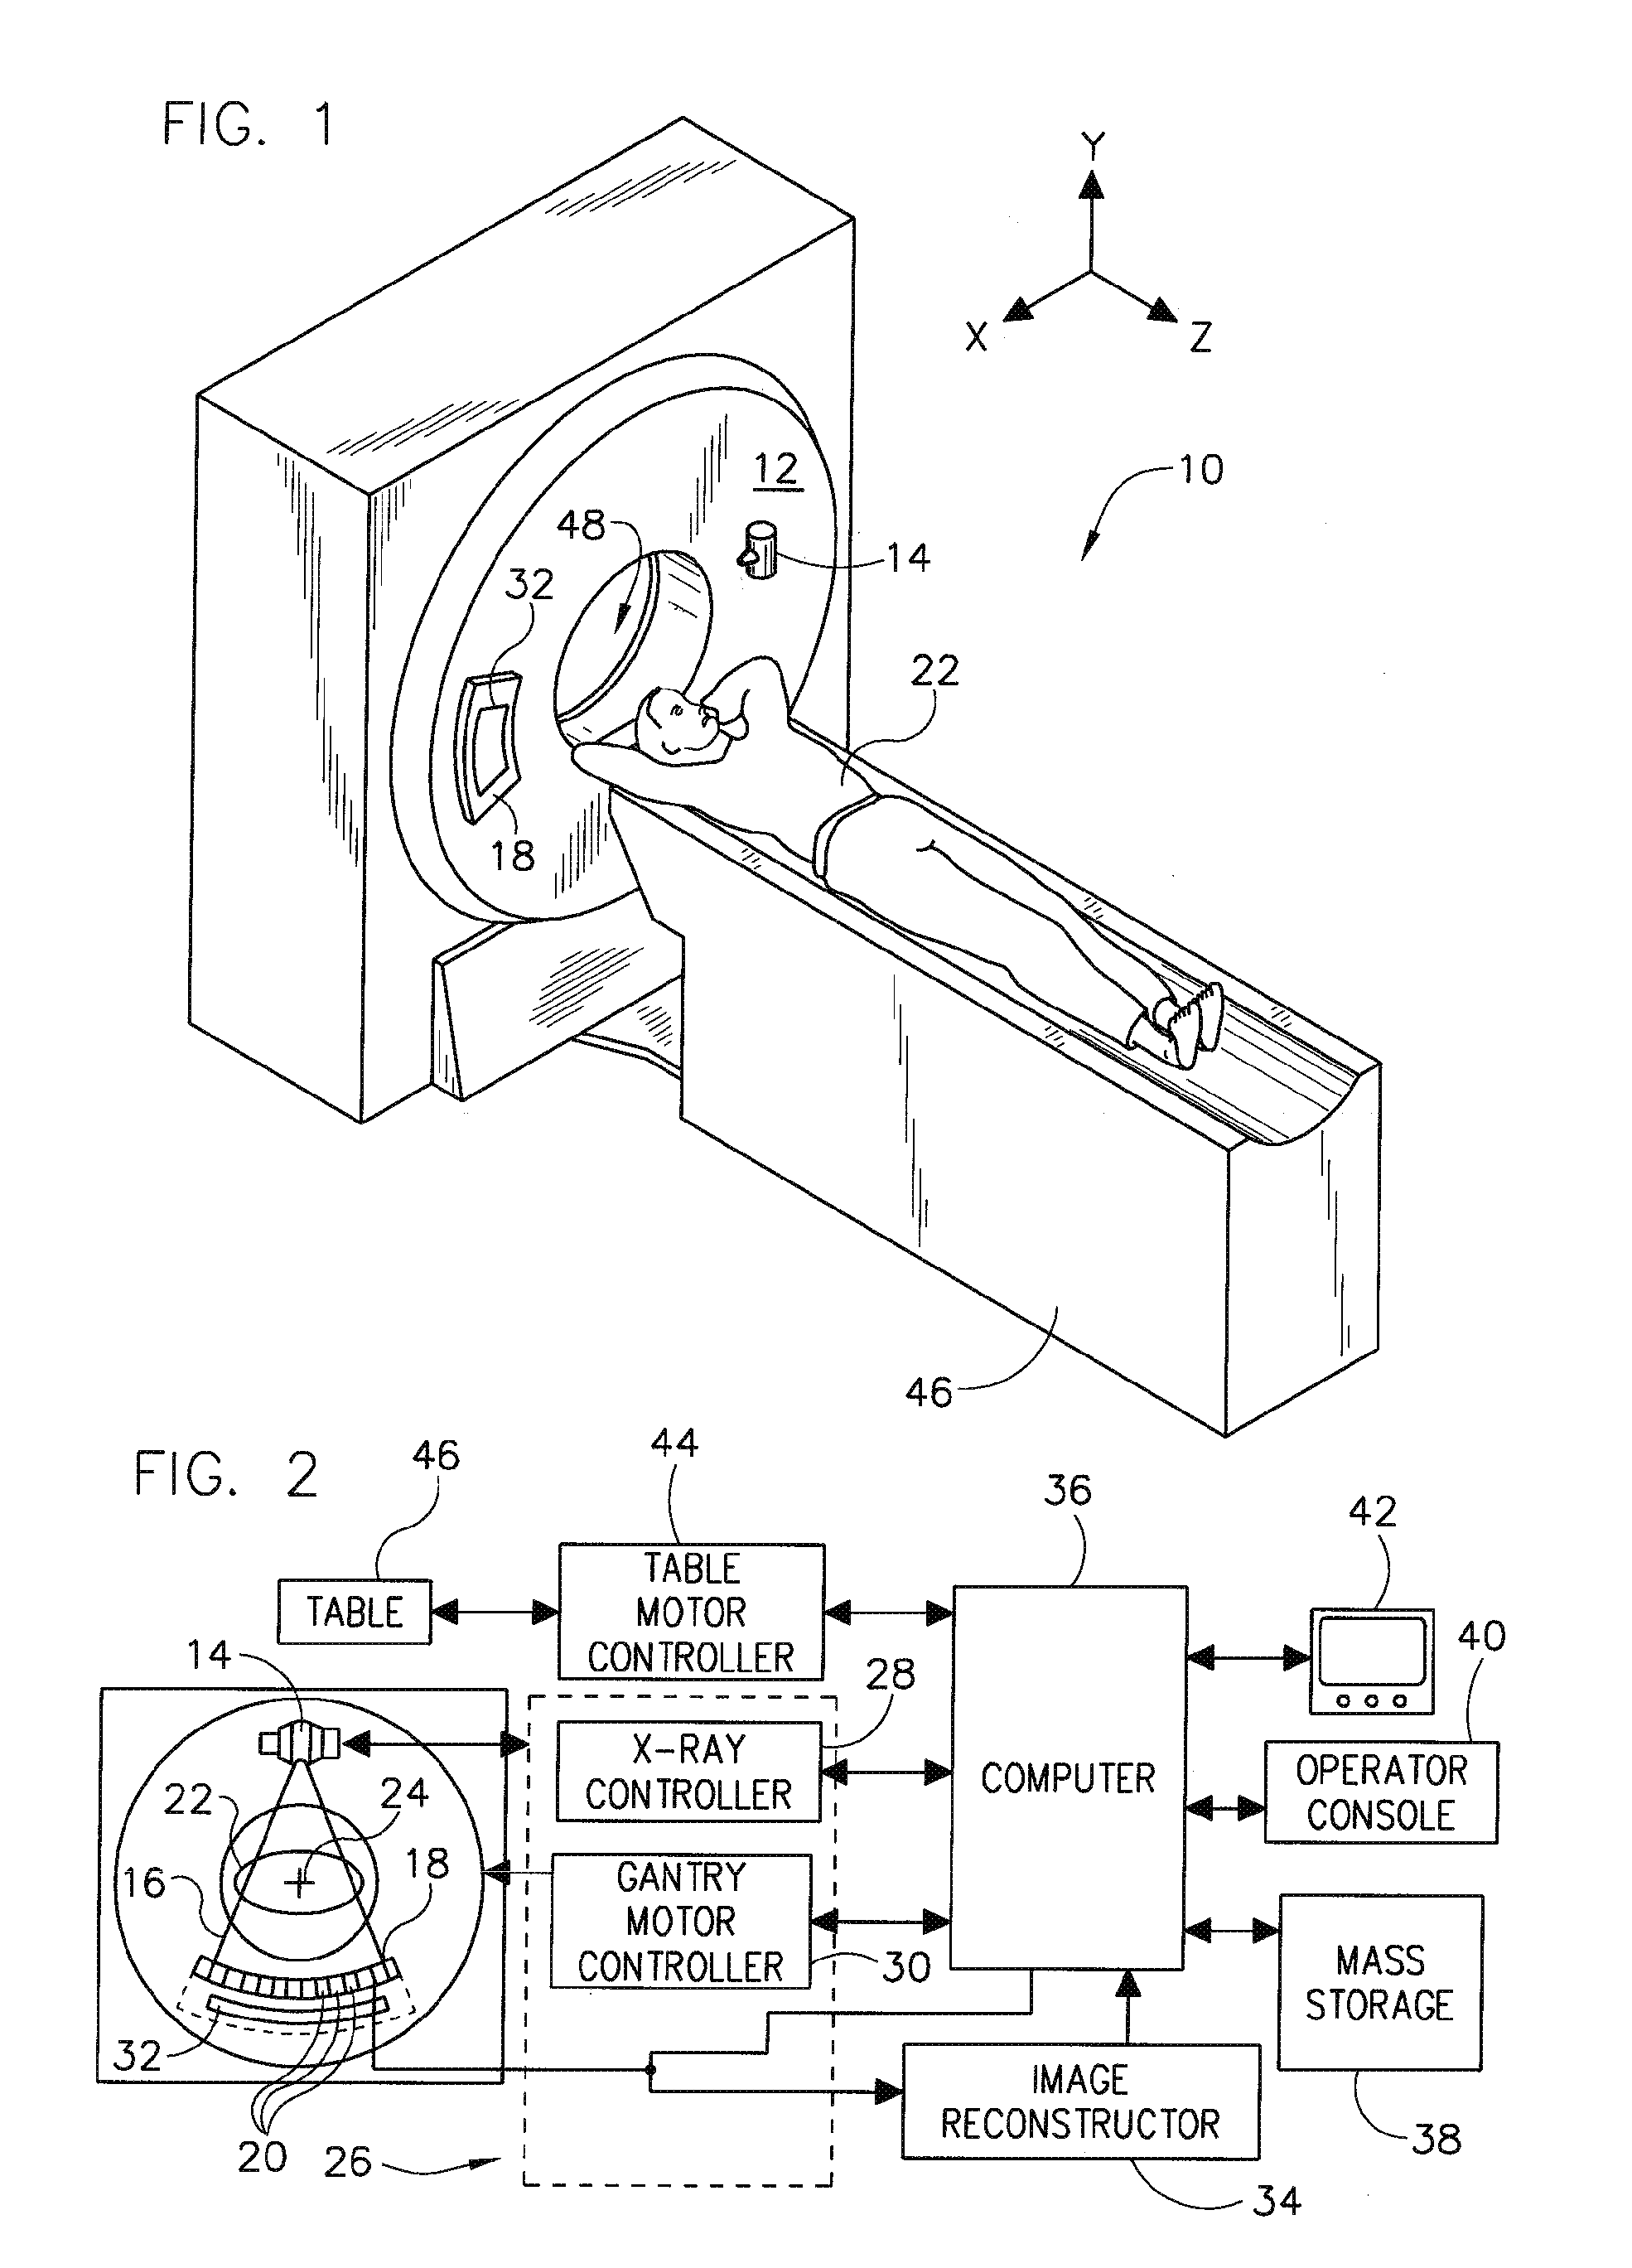 Method and apparatus for reduction of metal artifacts in CT images